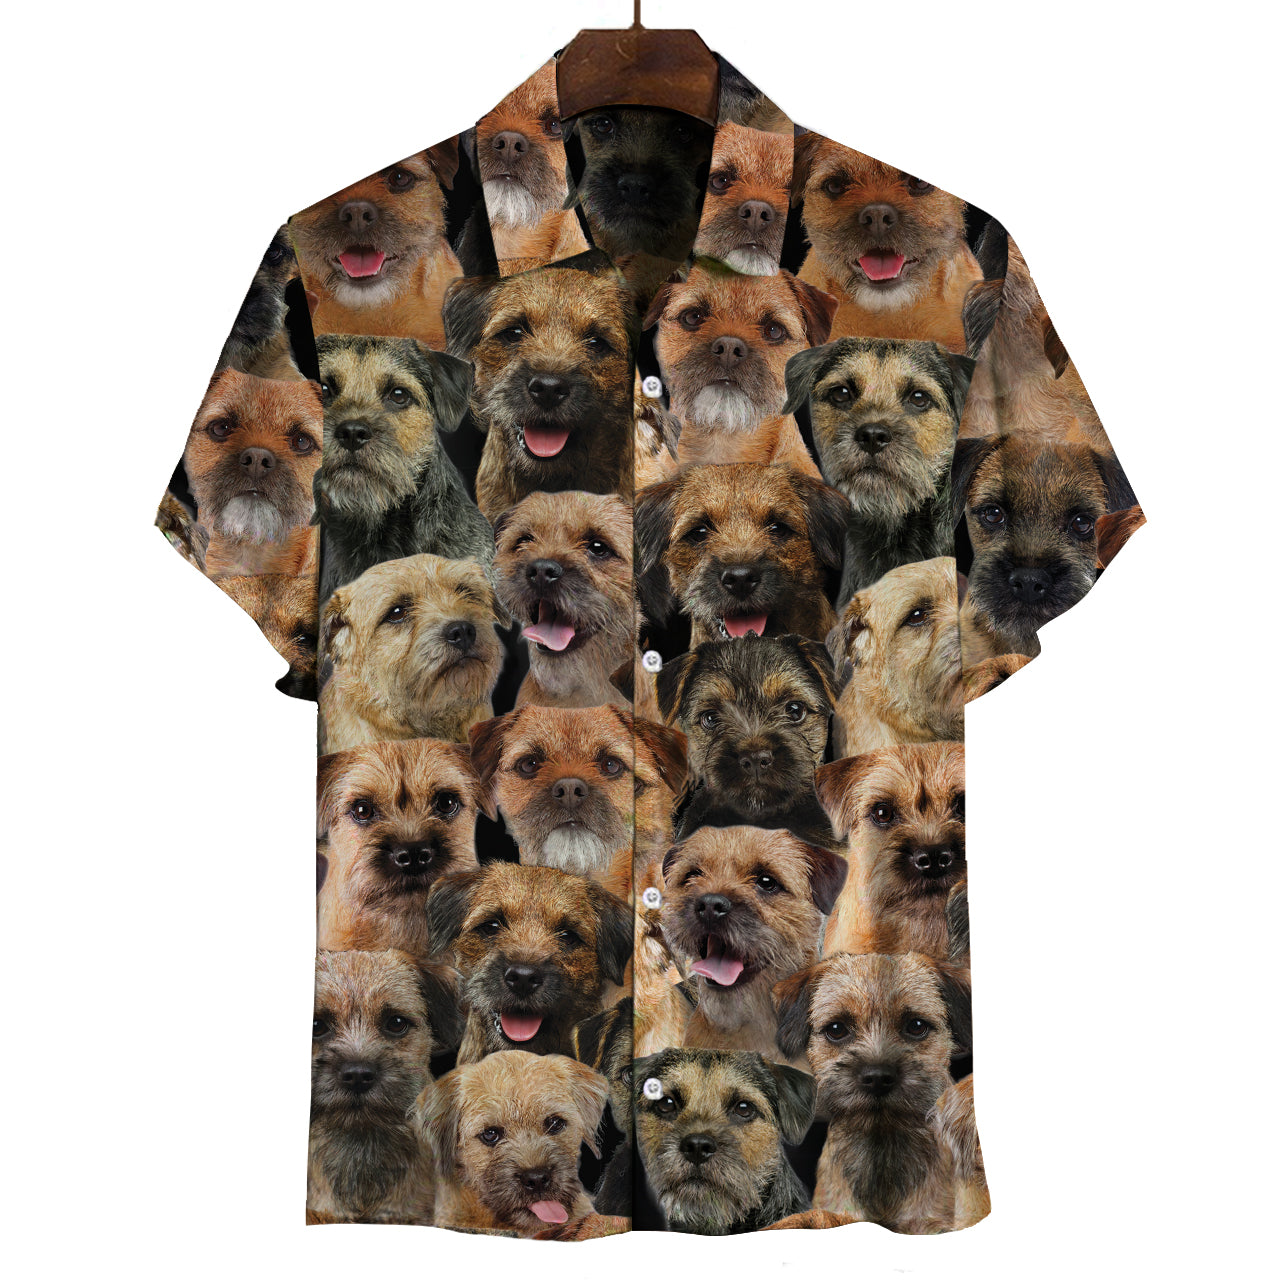 You Will Have A Bunch Of Border Terriers - Shirt V1